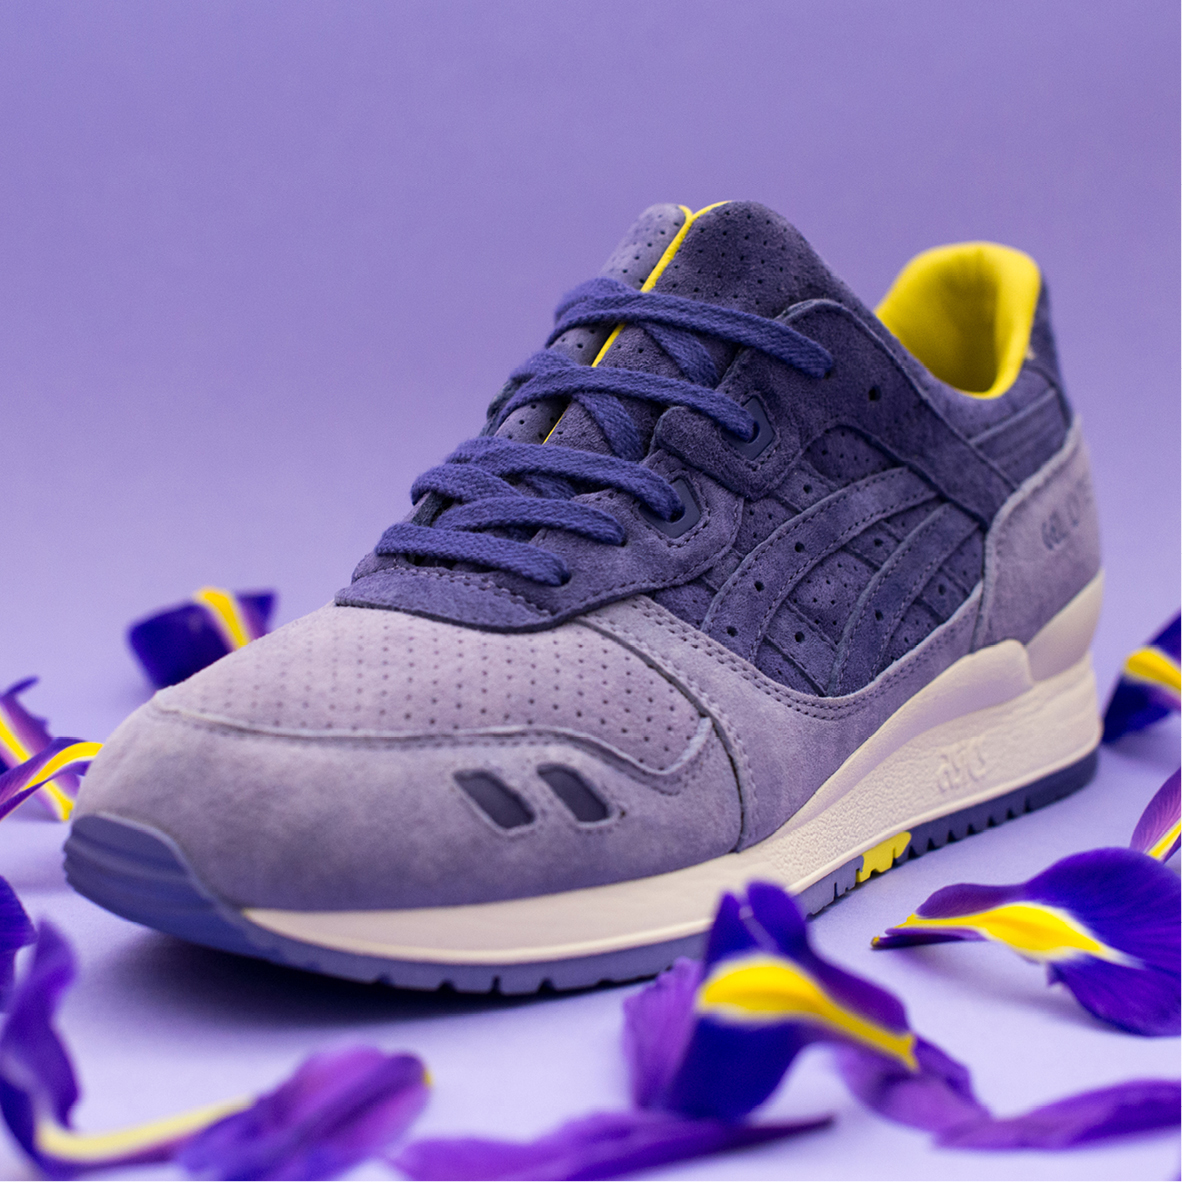 Asics Gel Lyte III Collaborations Are in Full Bloom | Sole Collector